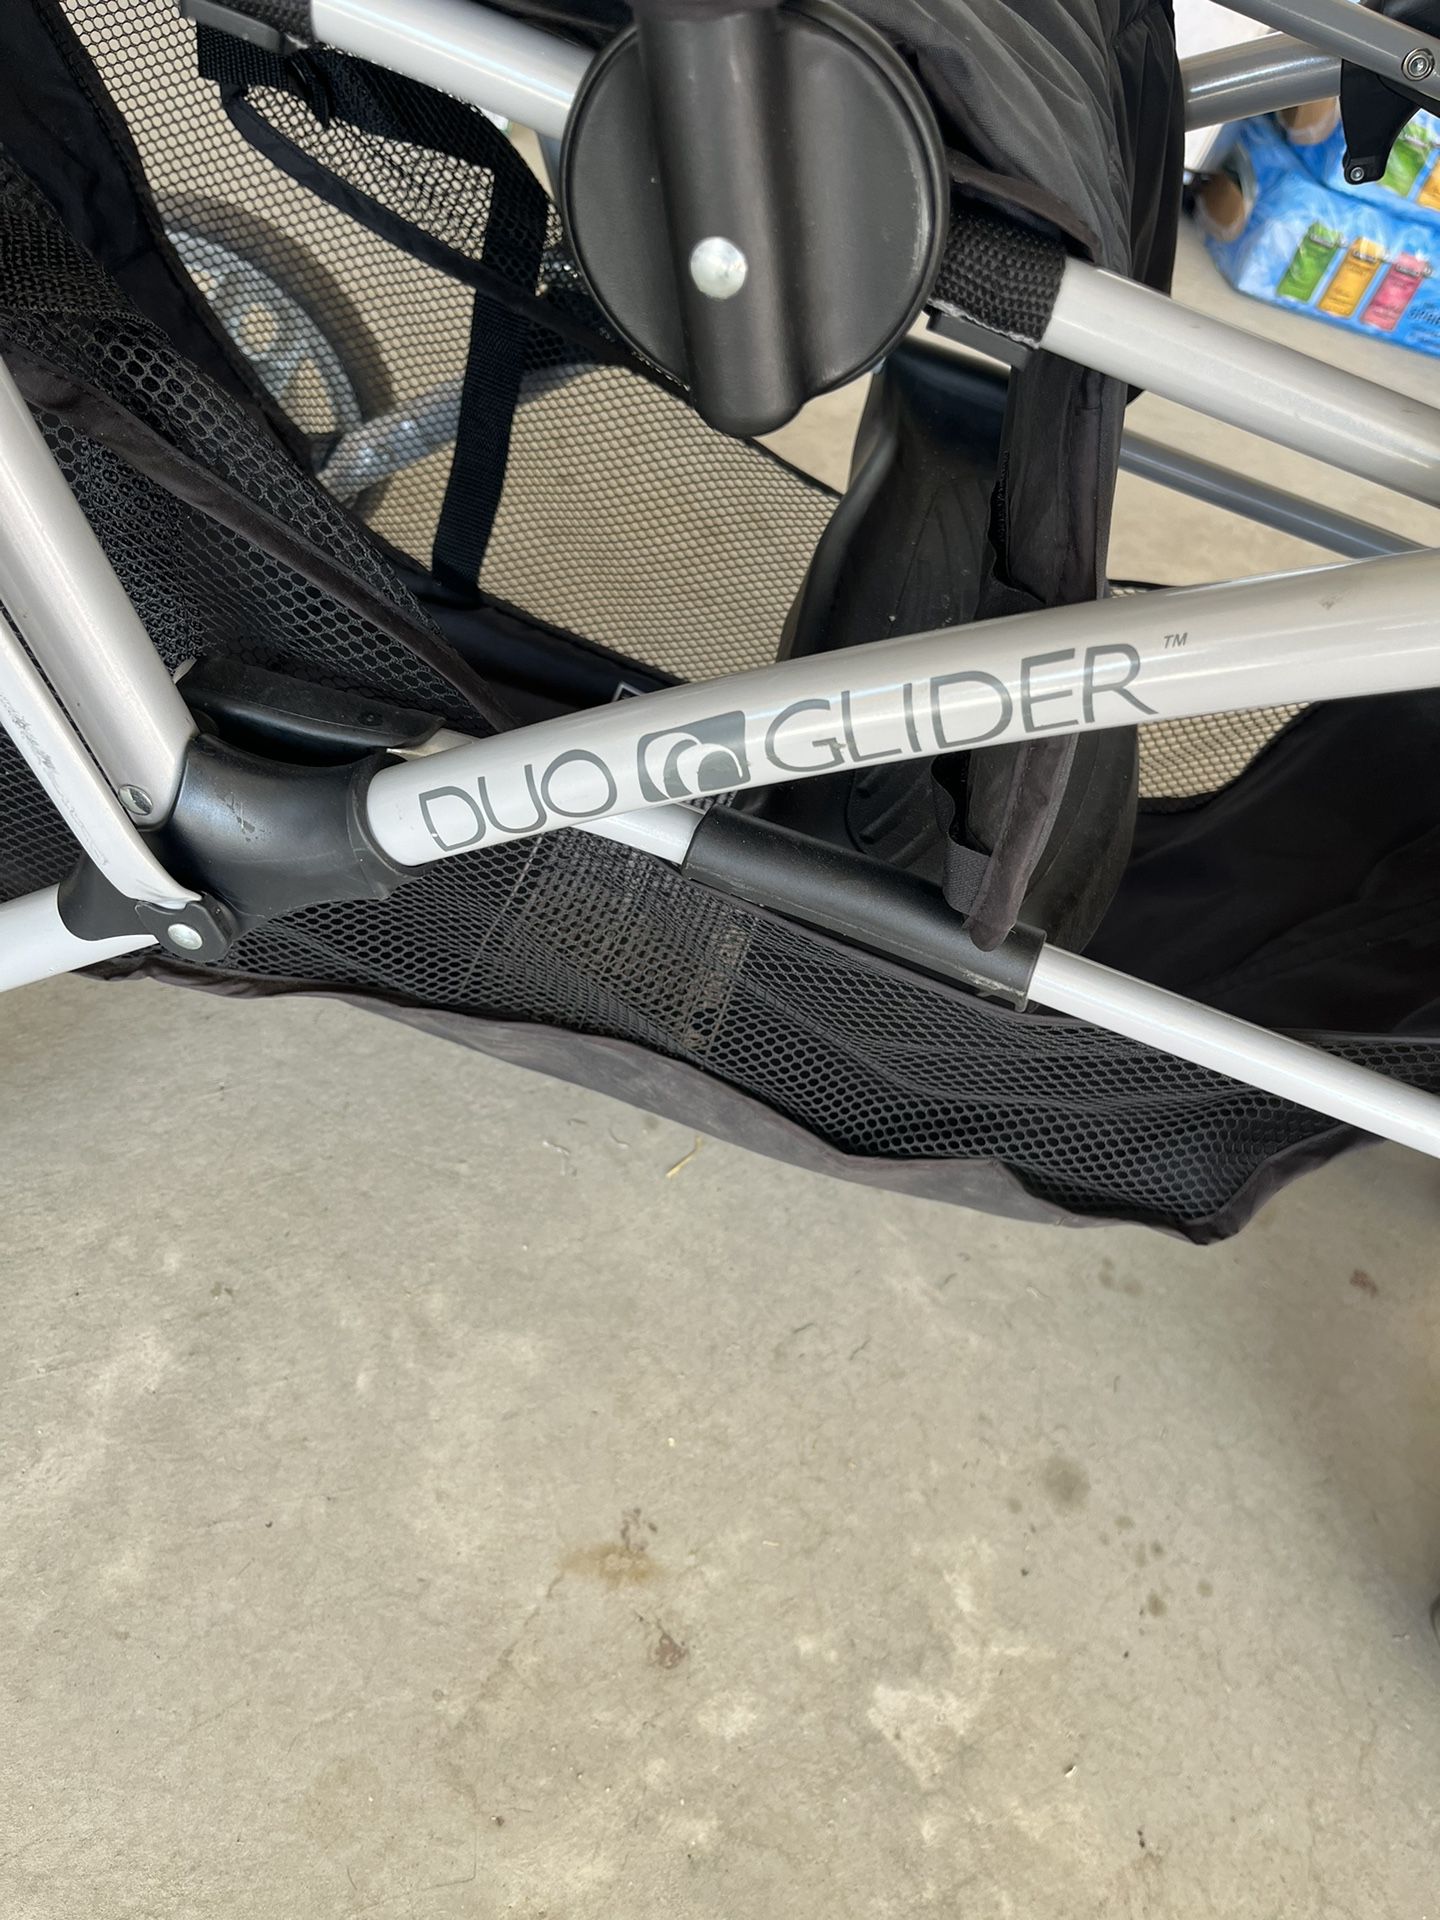 Duo glider Double Stroller 